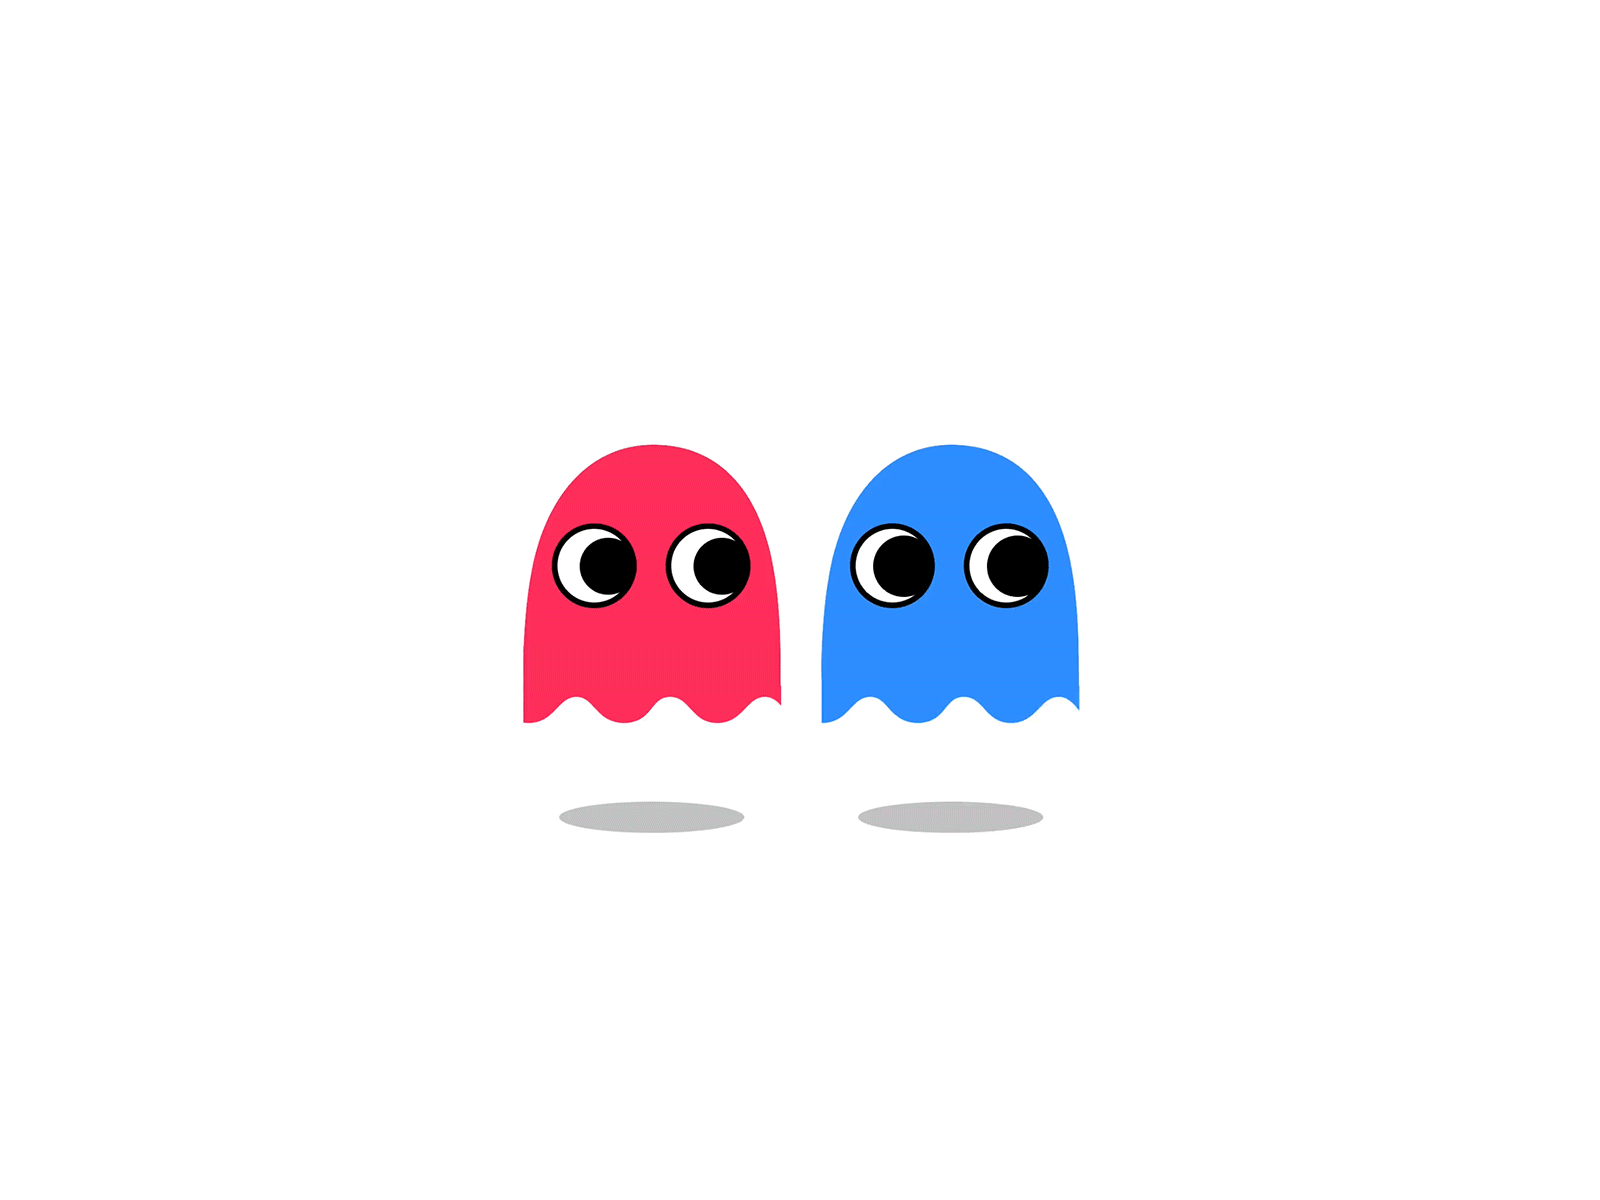 Creating an animated Pacman pattern  DEV Community